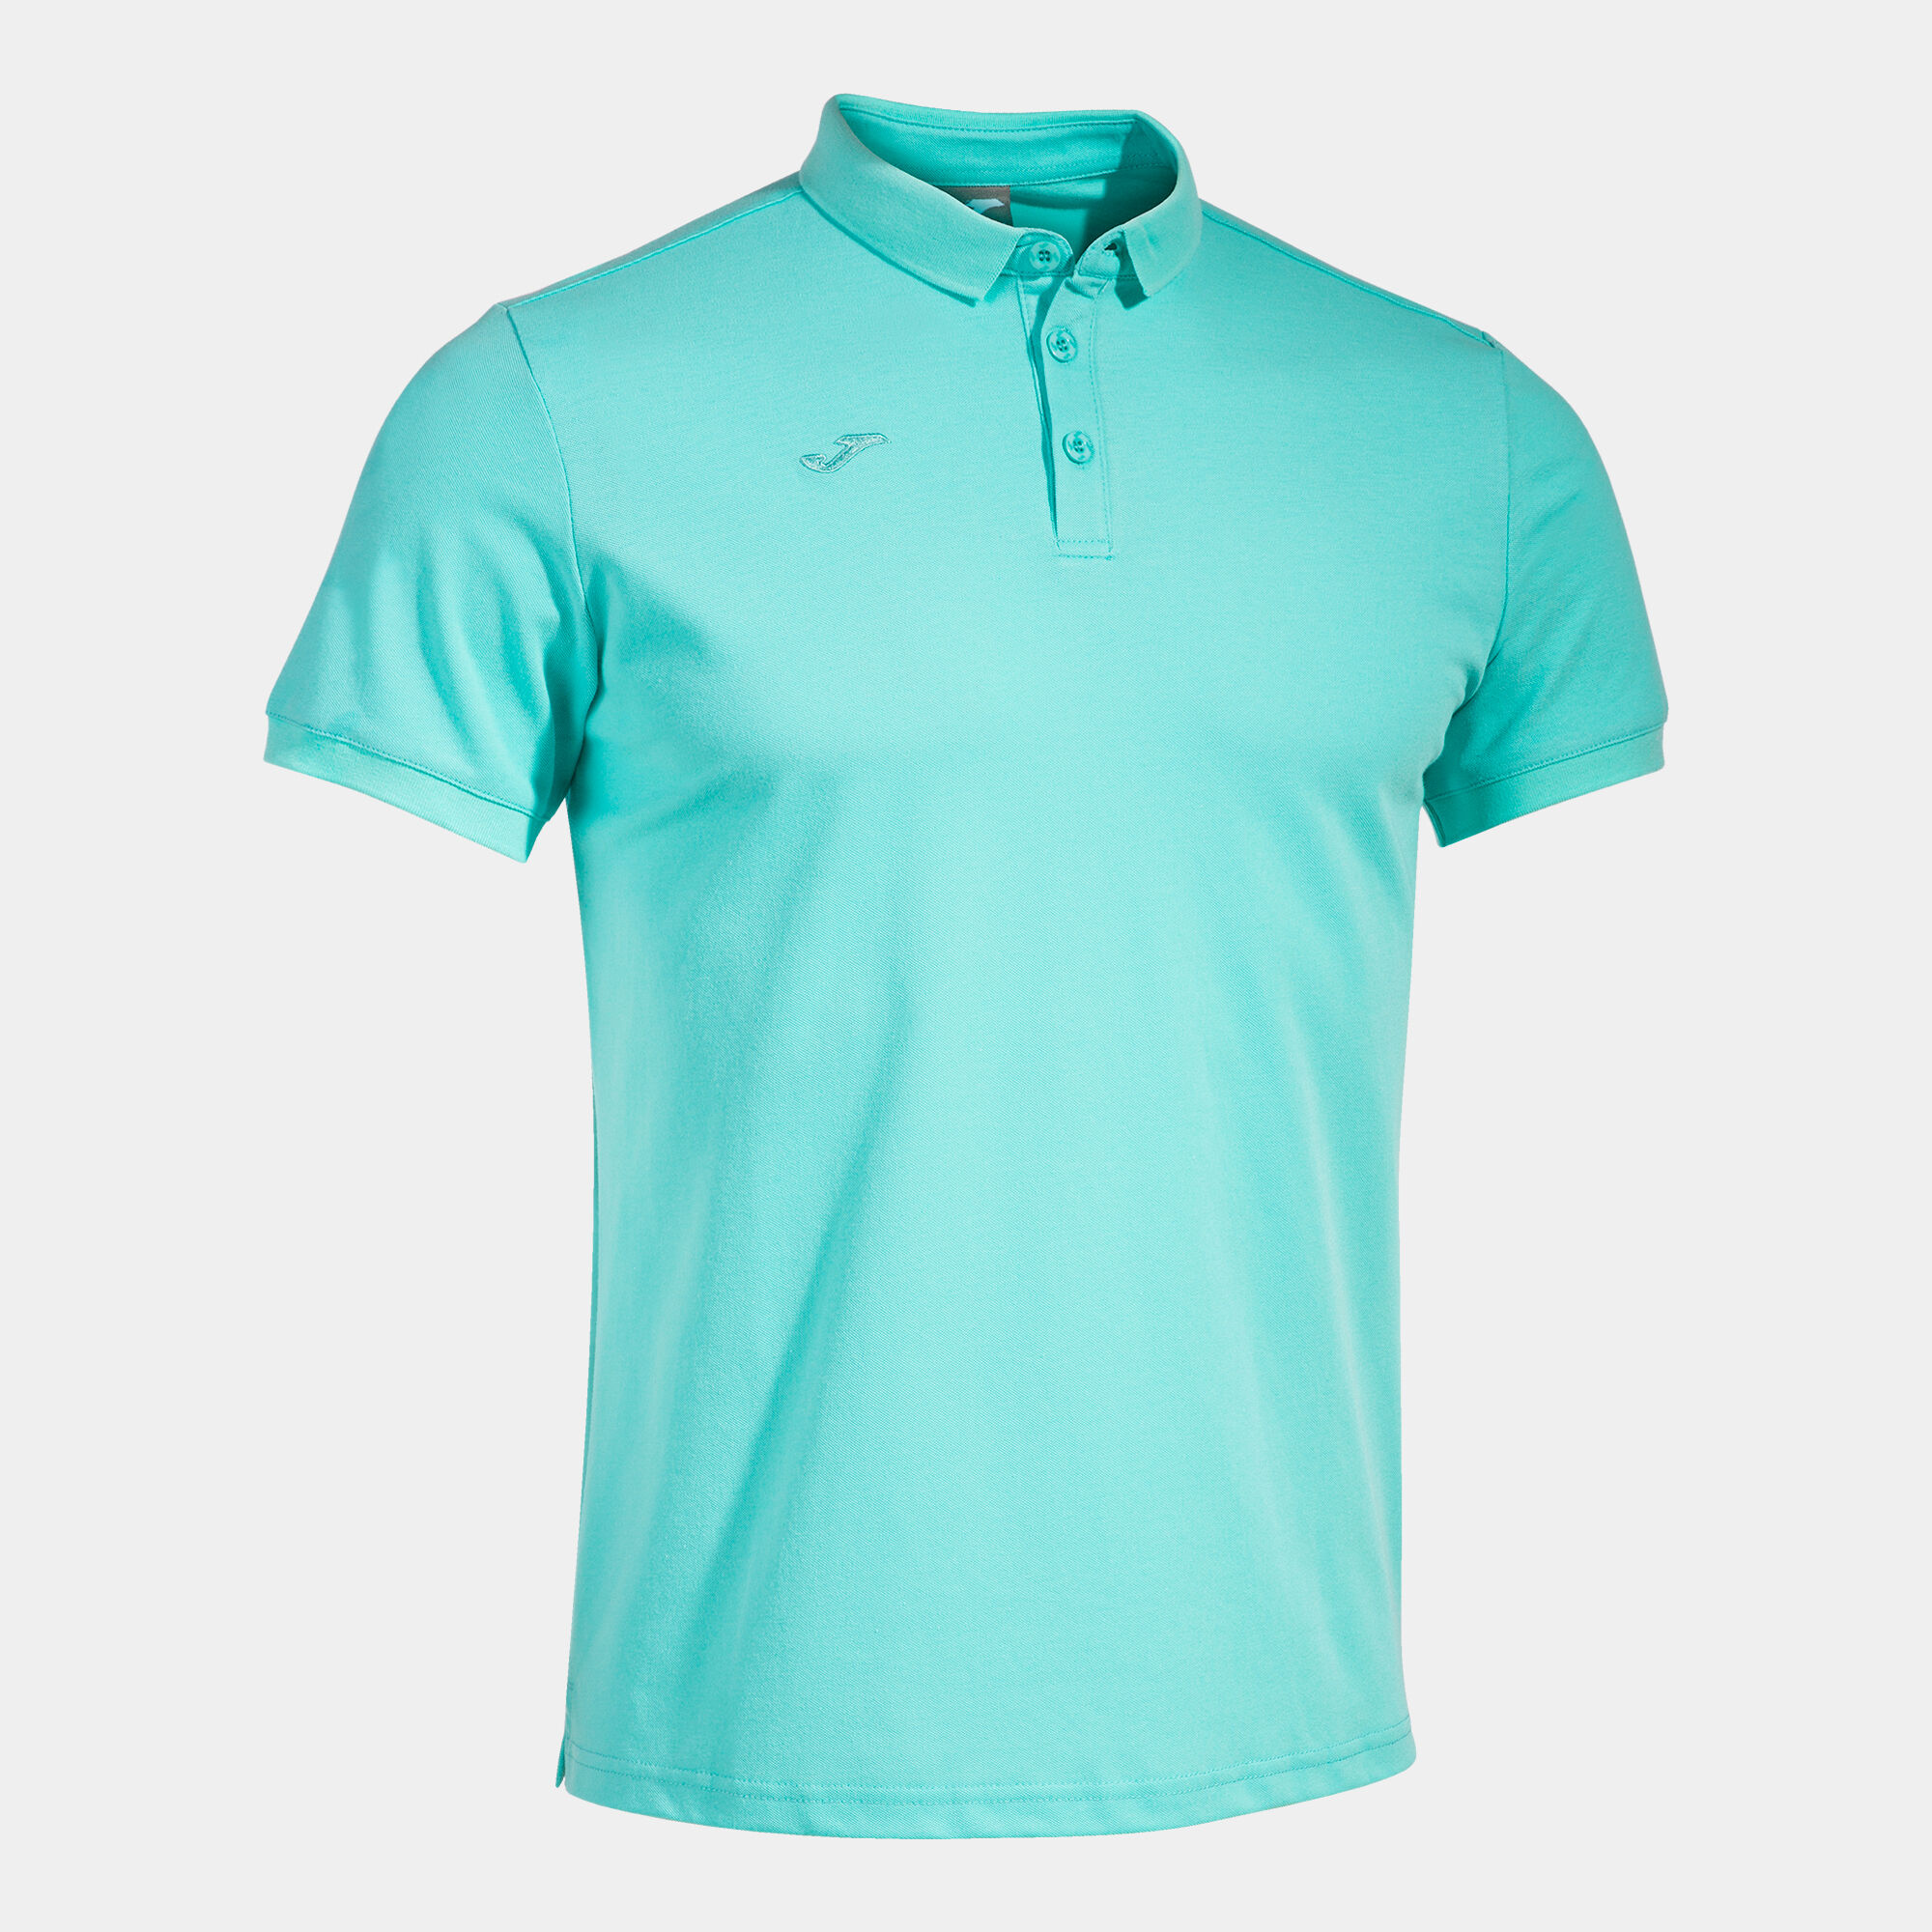 Polo manches courtes homme Pasarela III turquoise